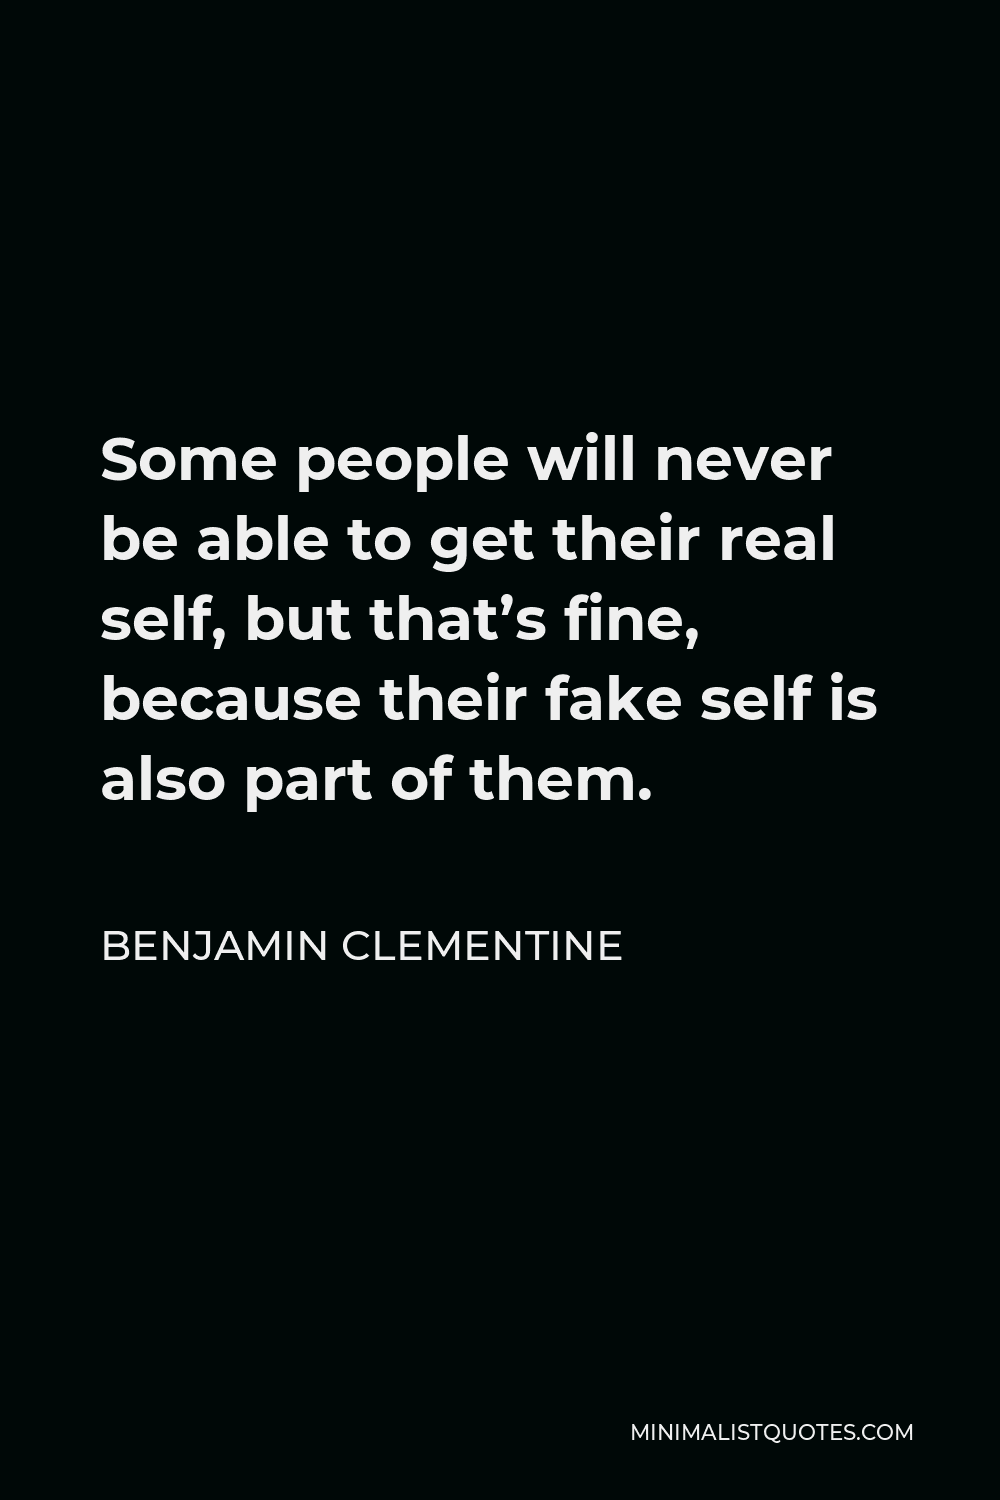 Benjamin Clementine Quote - Some people will never be able to get their real self, but that’s fine, because their fake self is also part of them.